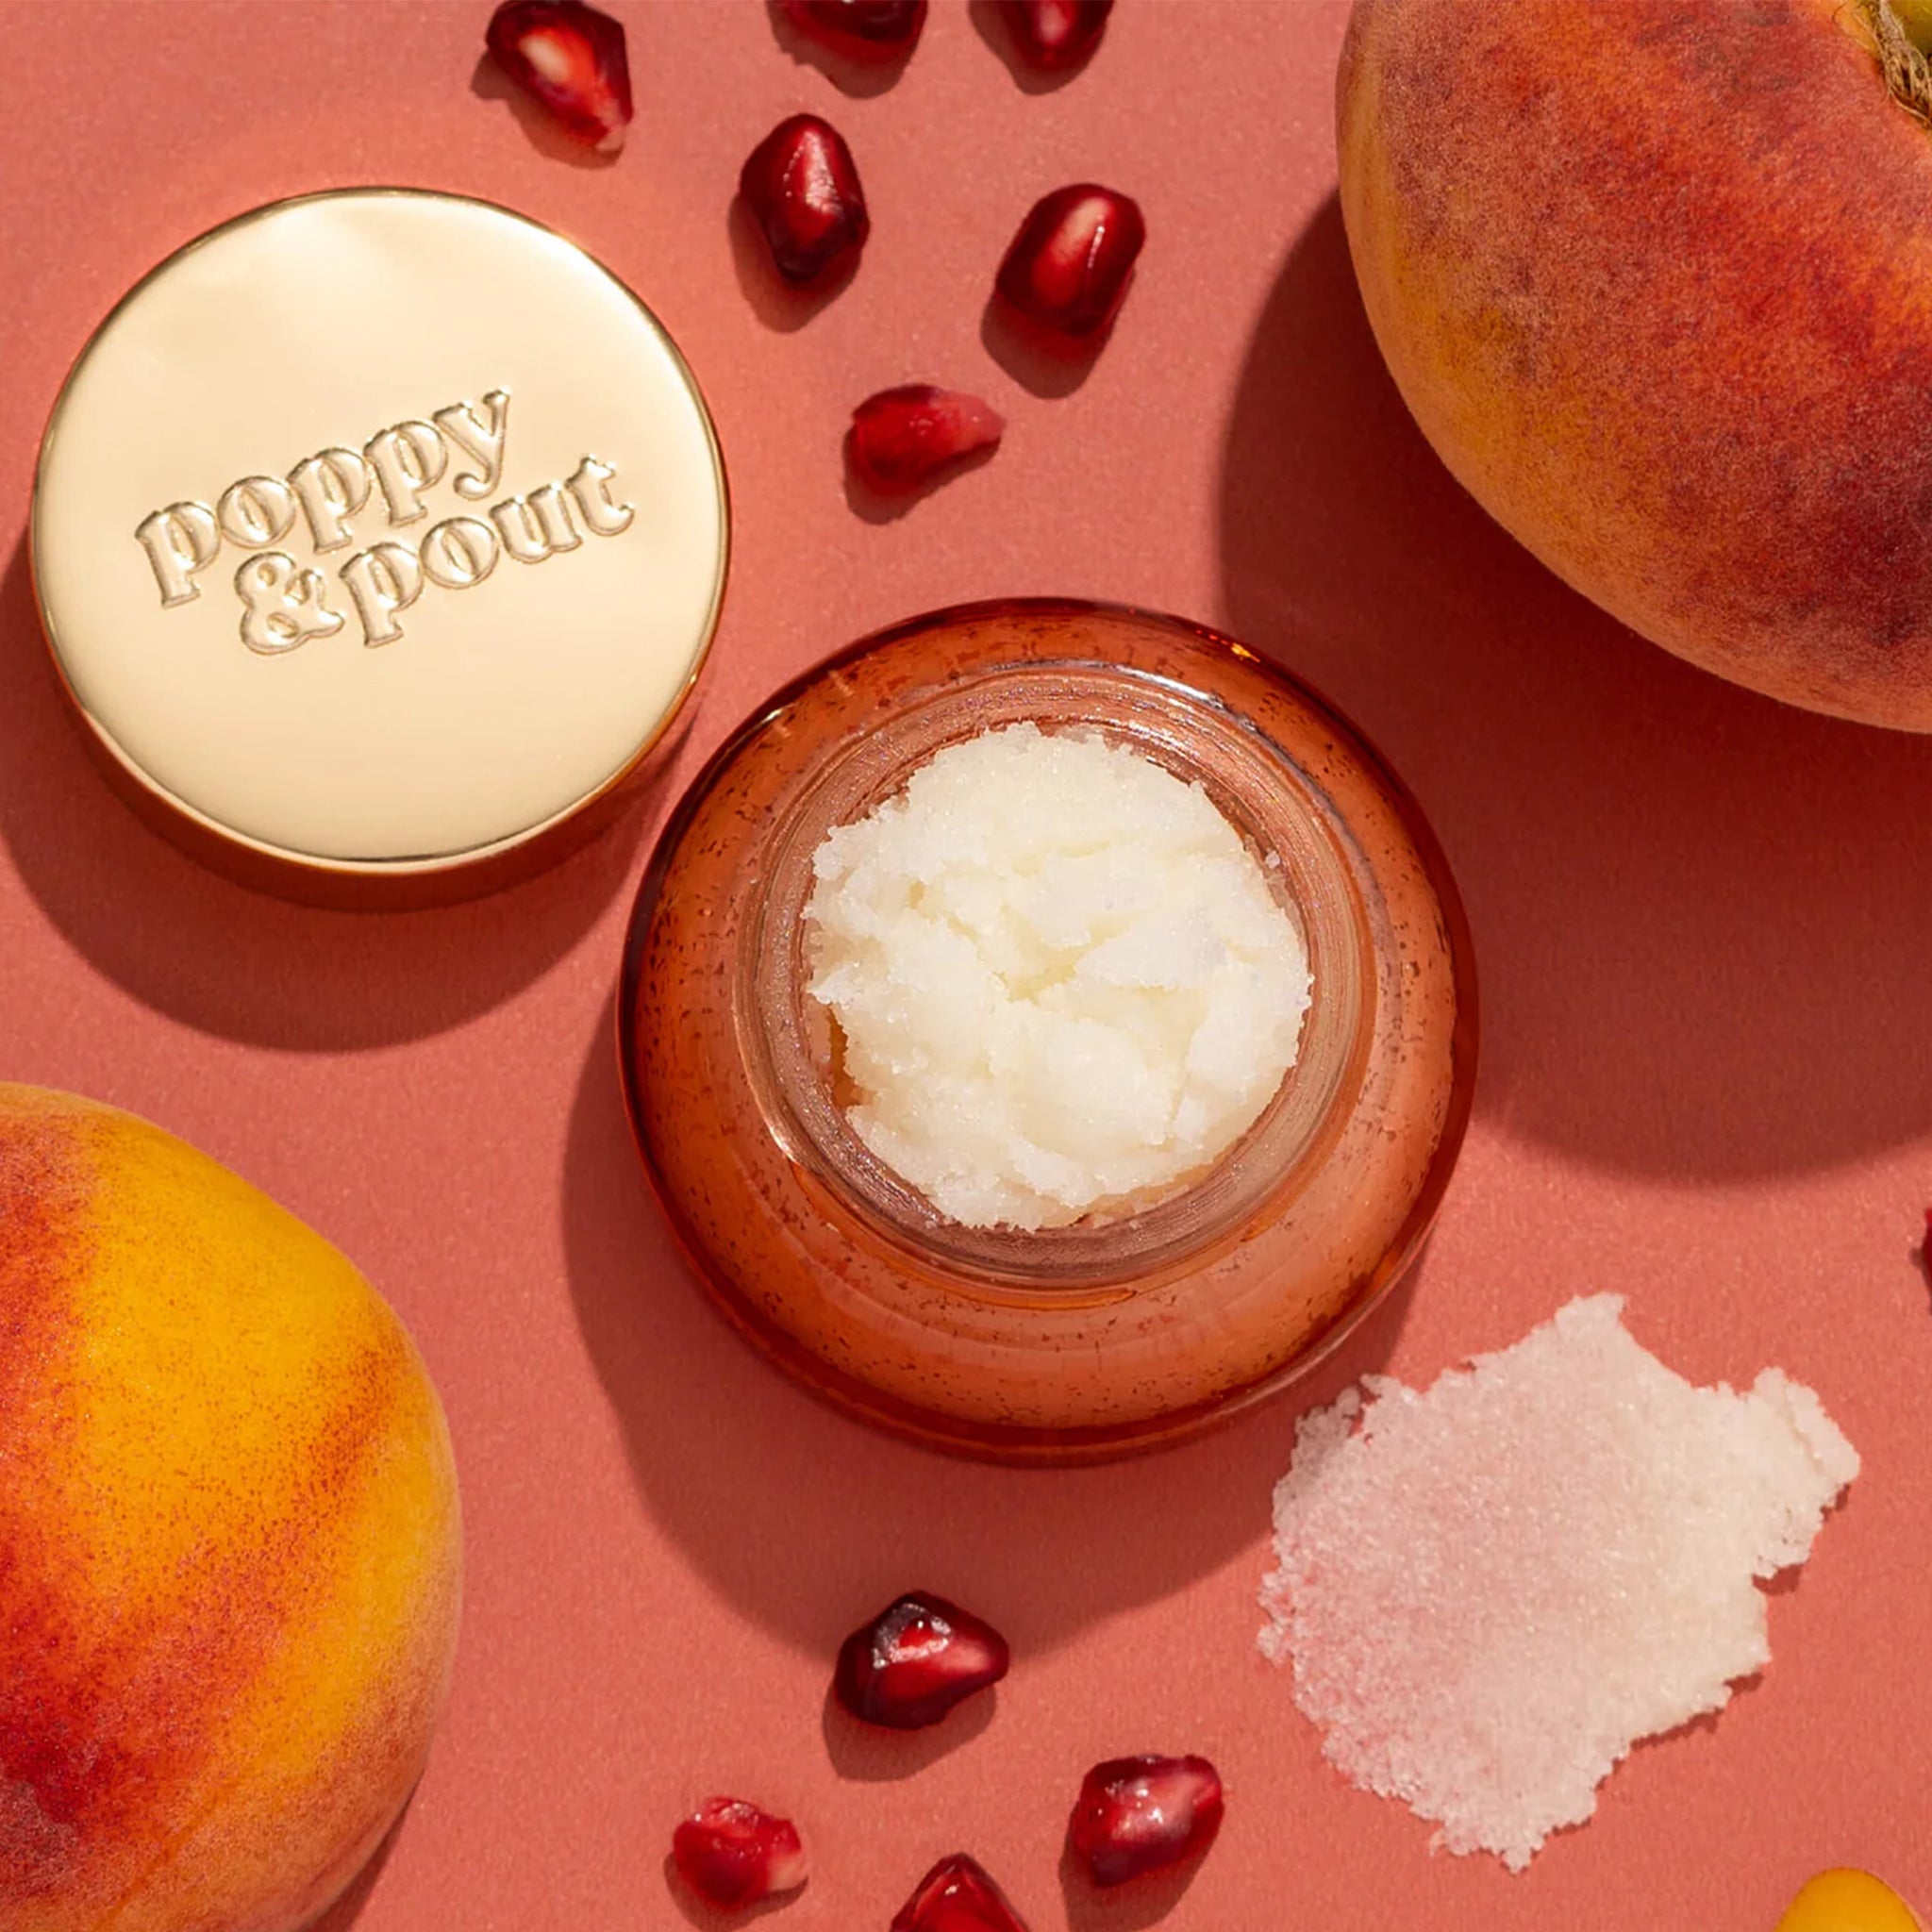 Lip scrub in an orange red container with a gold lid. This lip scrub is grainy, hydrating and perfect for your lips.